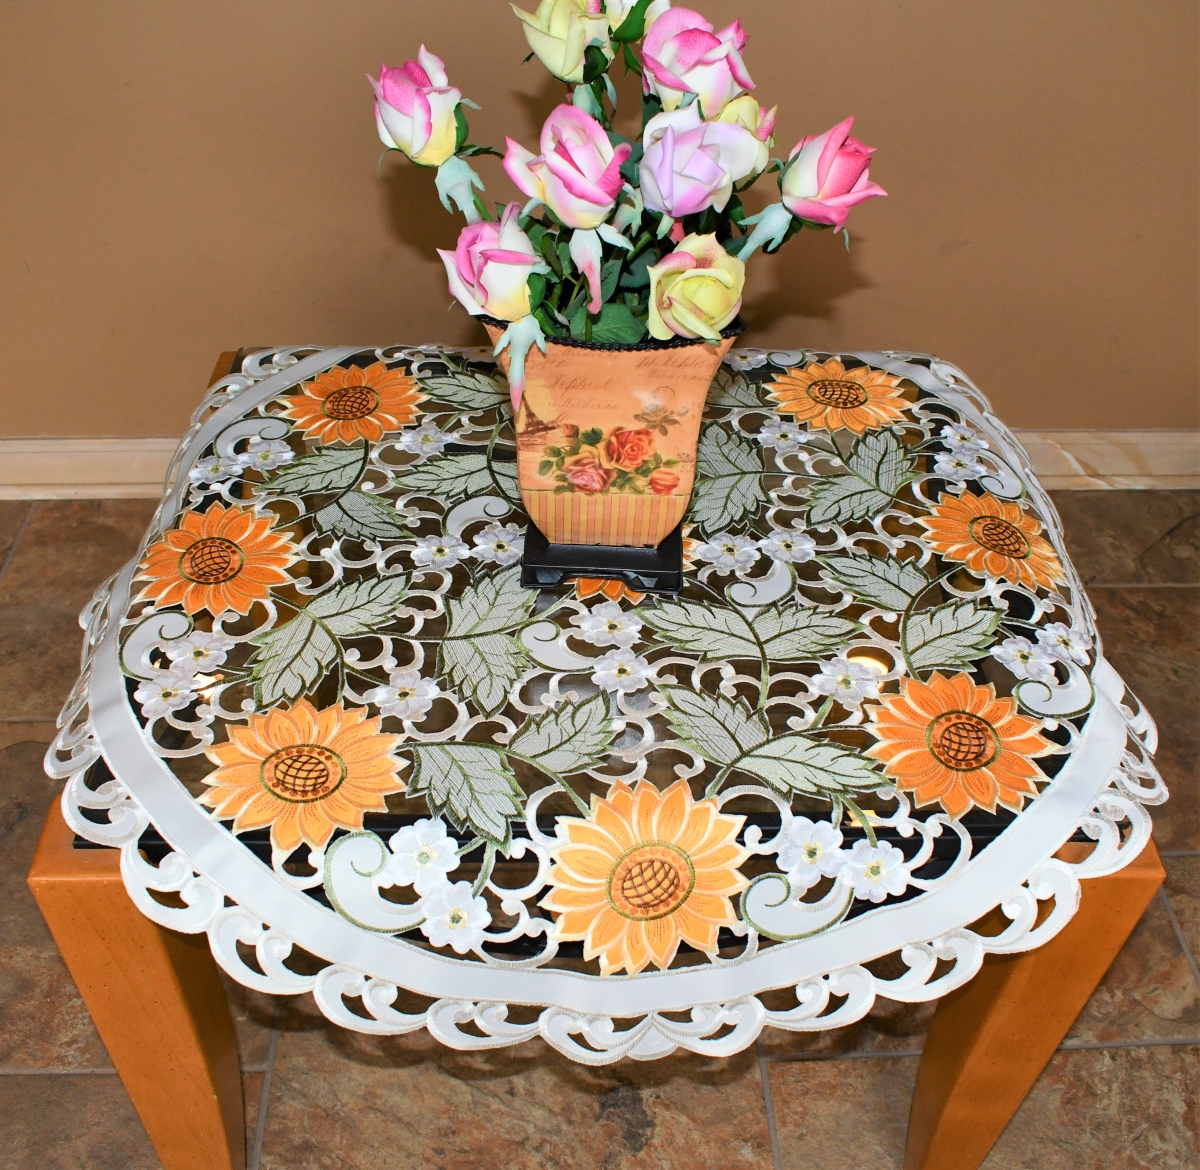 Picture of Sinobrite H8710-34x34RD 34 x 34 in. Sunflower on Cream Fabric Round Table Topper